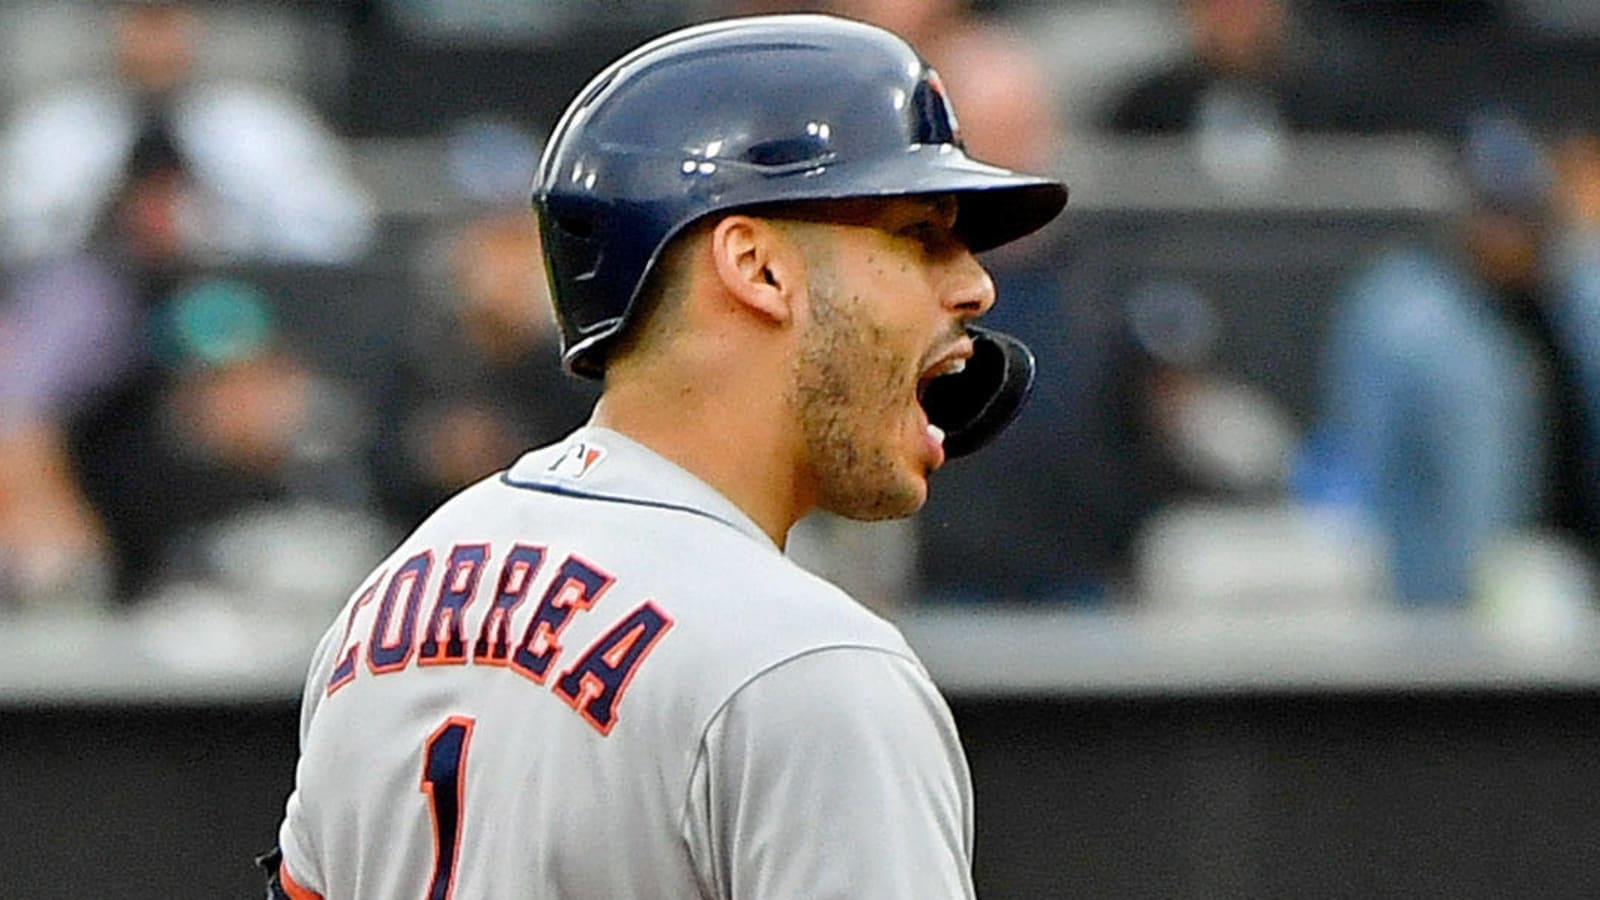 Carlos Correa hints that an extension with Astros is unlikely